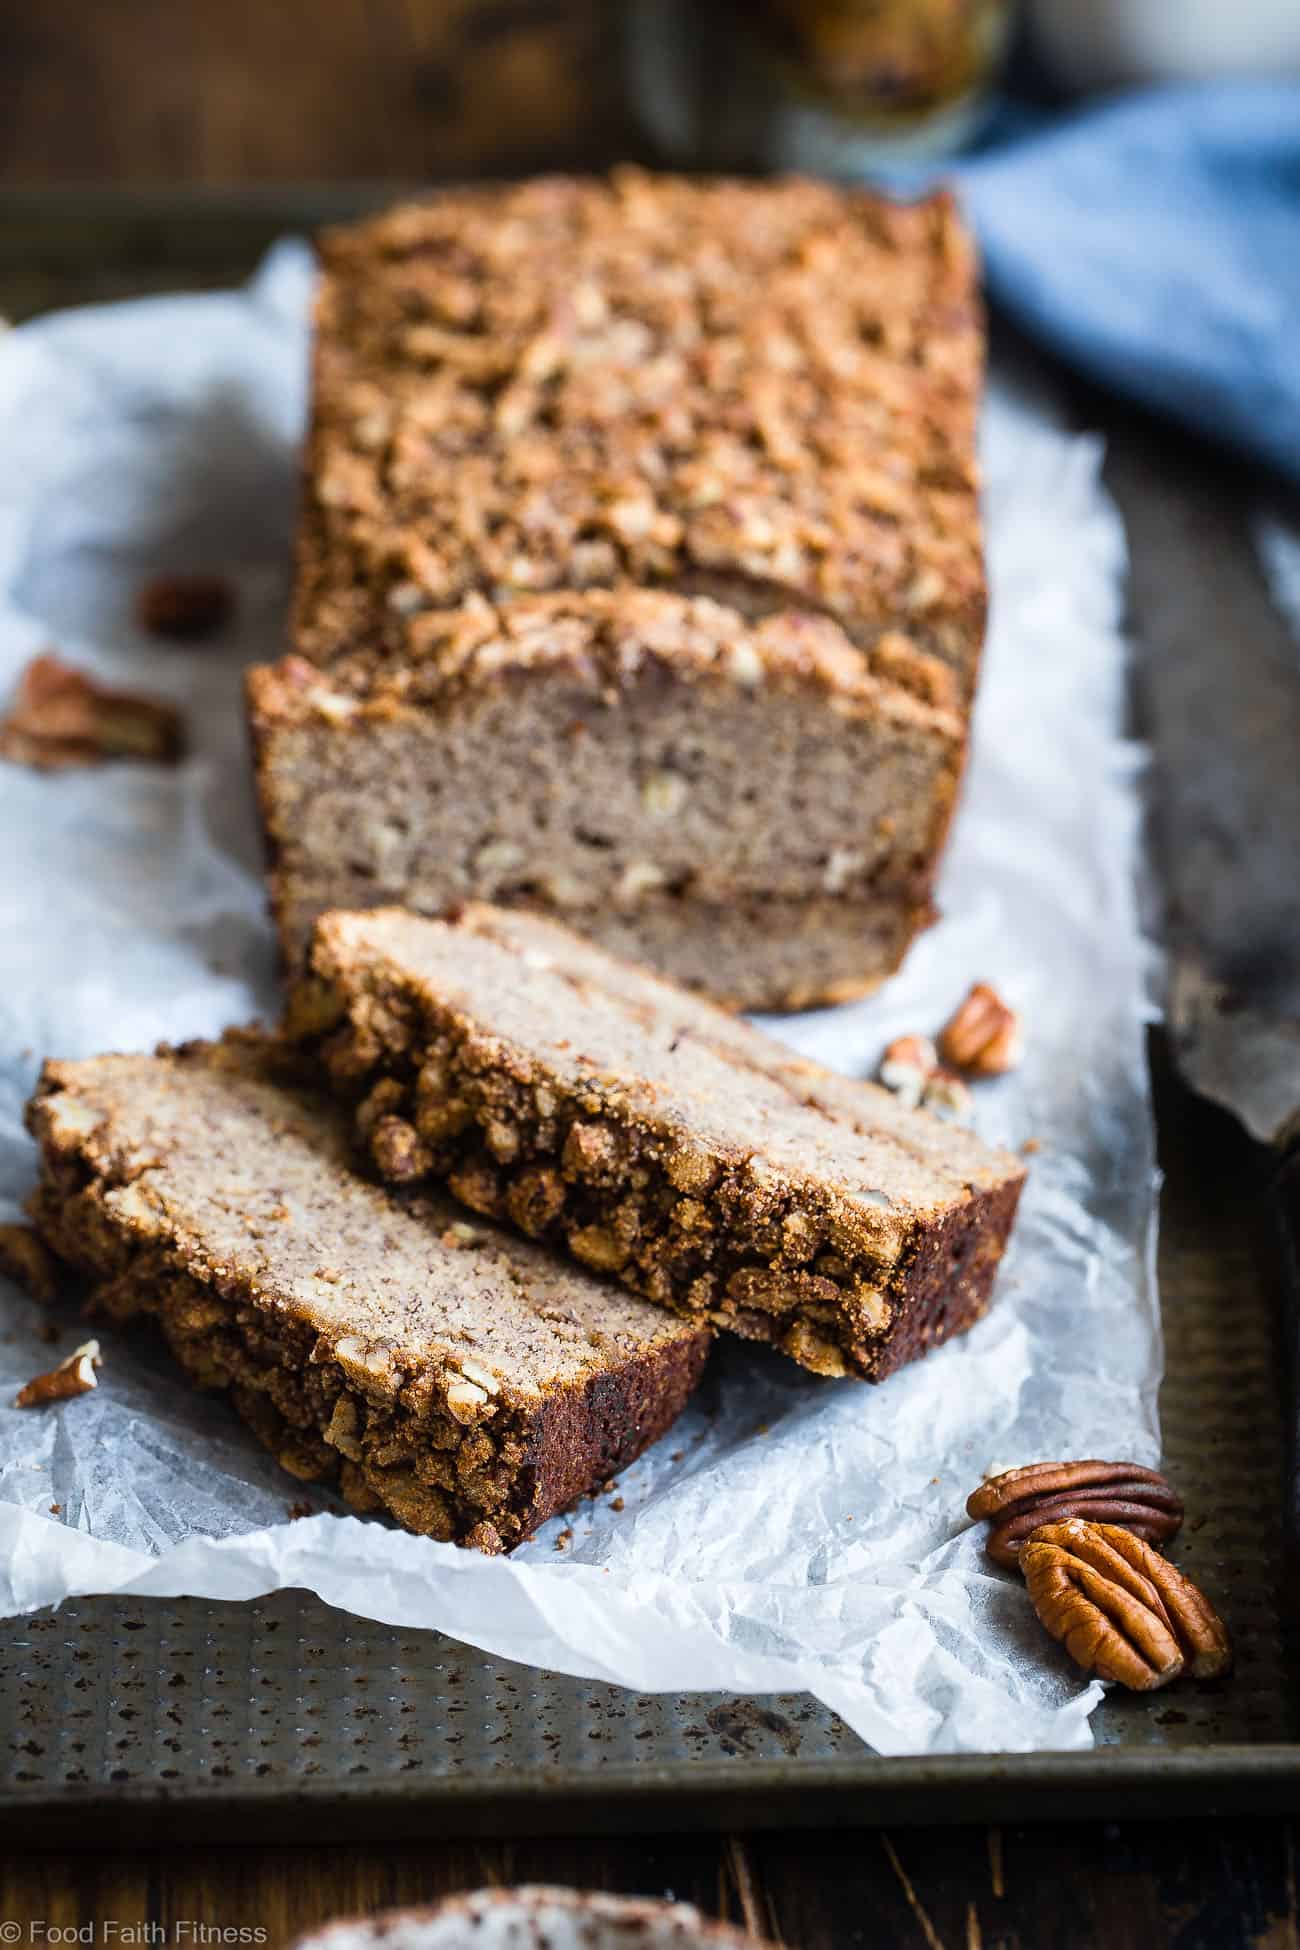 The Best Paleo Banana Bread with Pecan Streusel - This easy Paleo Coconut Flour Banana Bread with coconut flour is gluten/grain/dairy/refined sugar free but perfectly moist and sweet! The pecan topping MAKES it so addicting and you'll never know it's healthy! | Foodfaithfitness.com | @FoodFaithFit